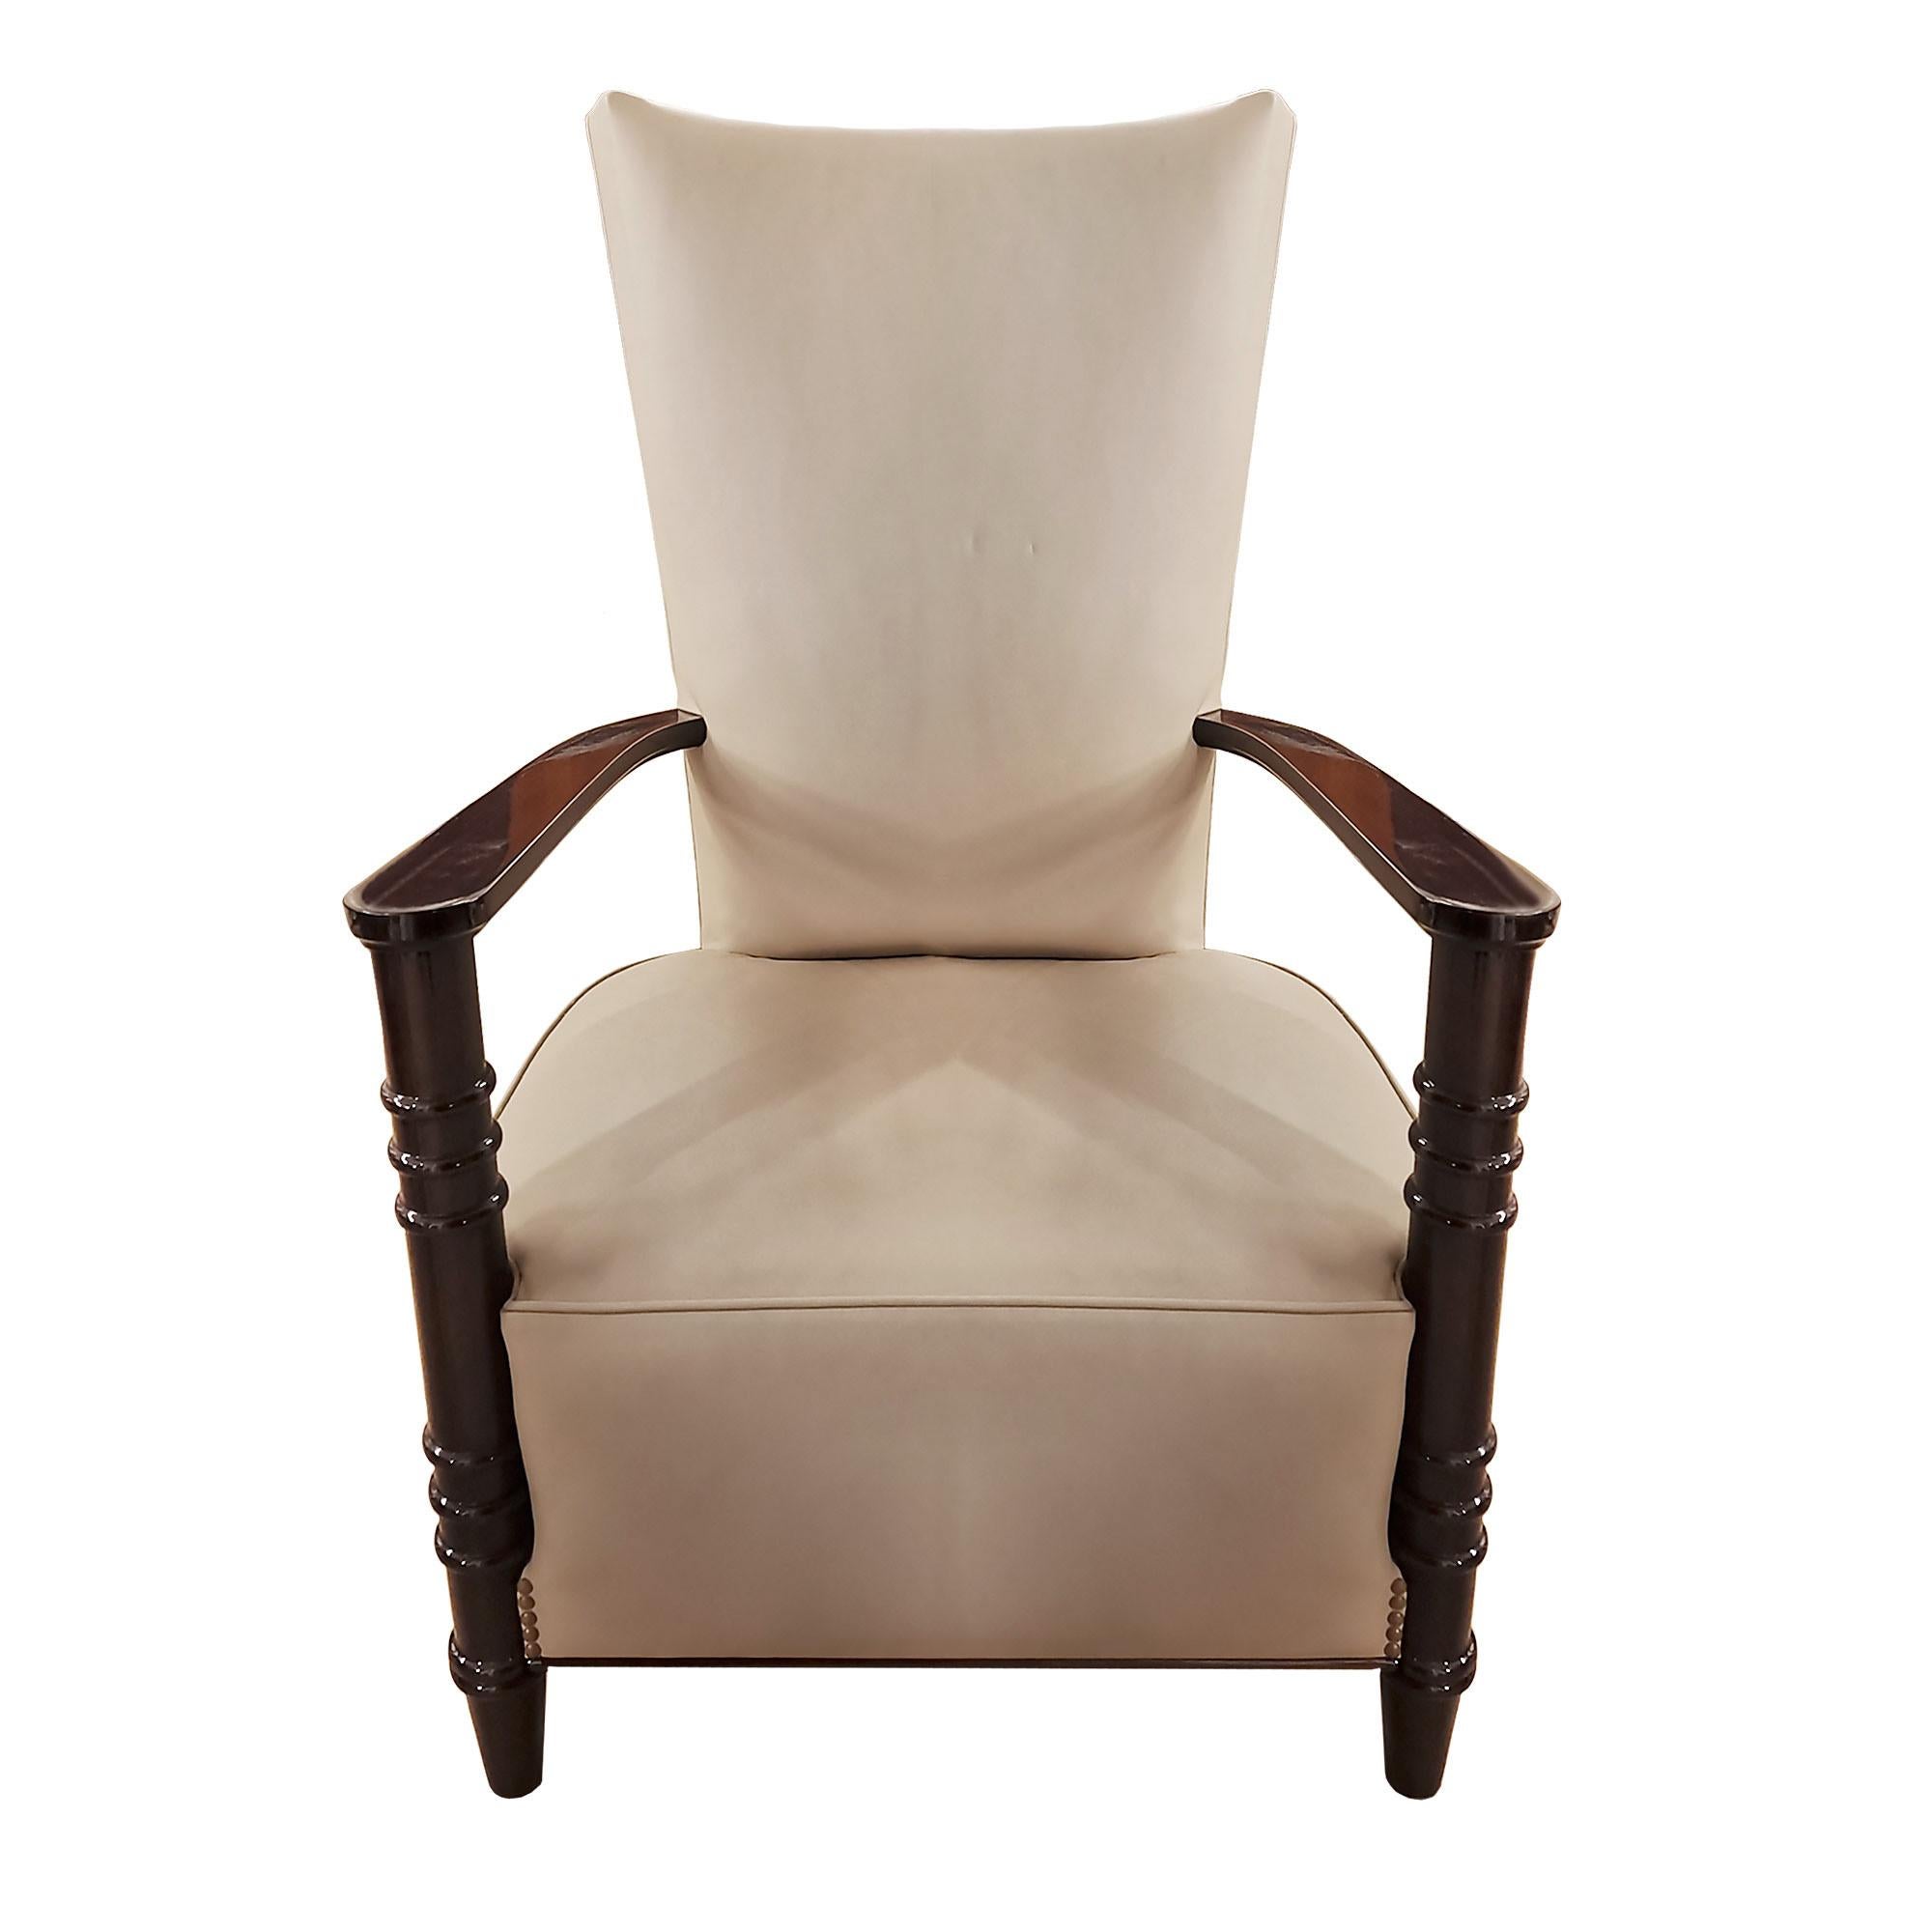 Elegant Art Deco style armchair with high back, French polished wood and beige-grey leather upholstery.

France, c. 1940.